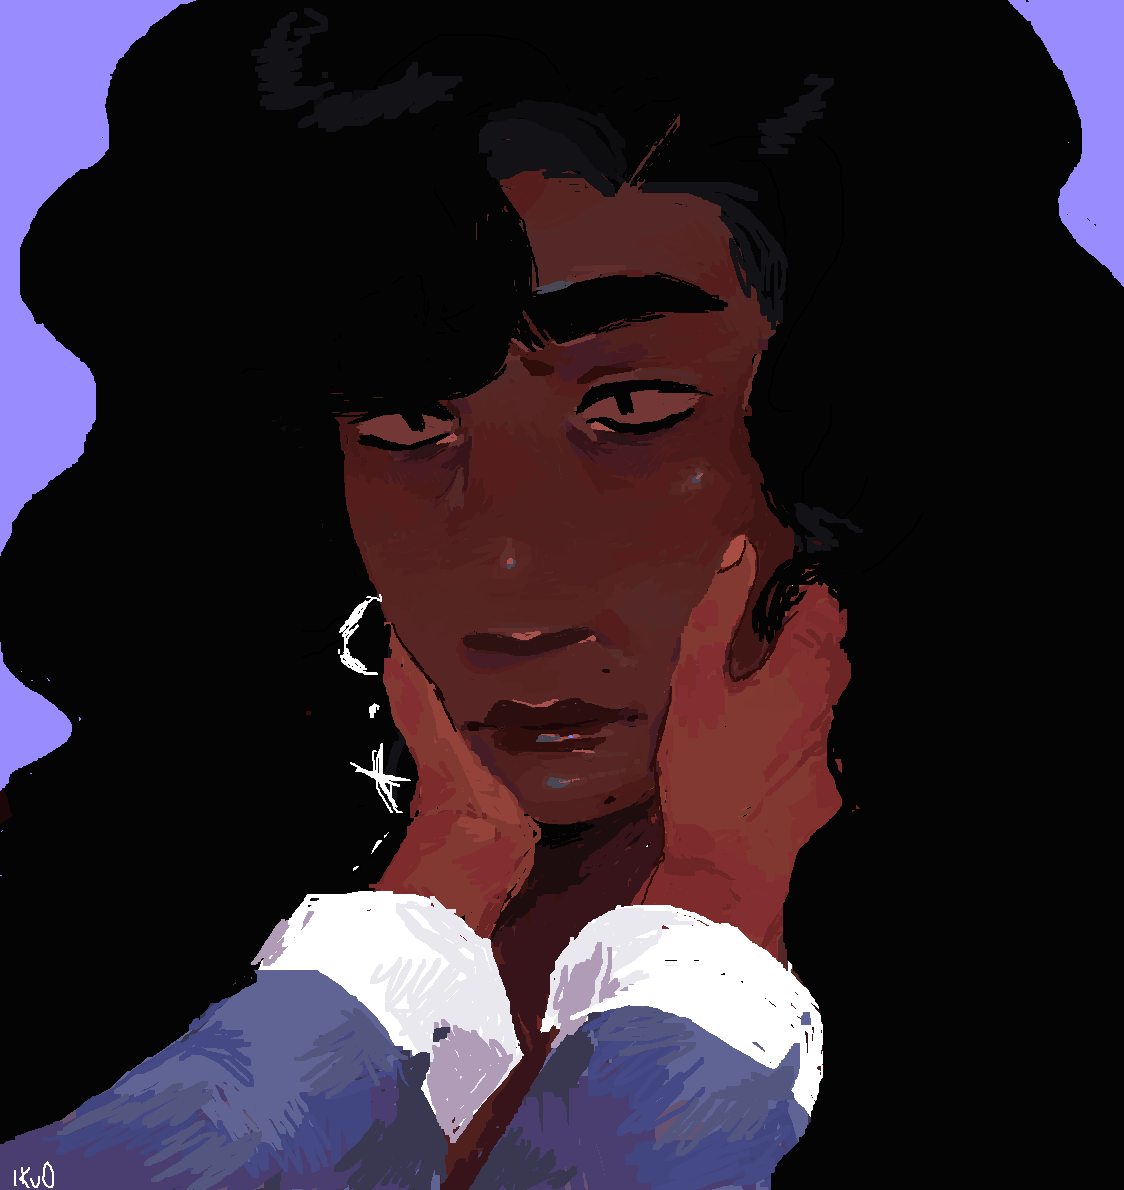 A digital illustration of a dark-skin black woman whose face is held by a pair of hands